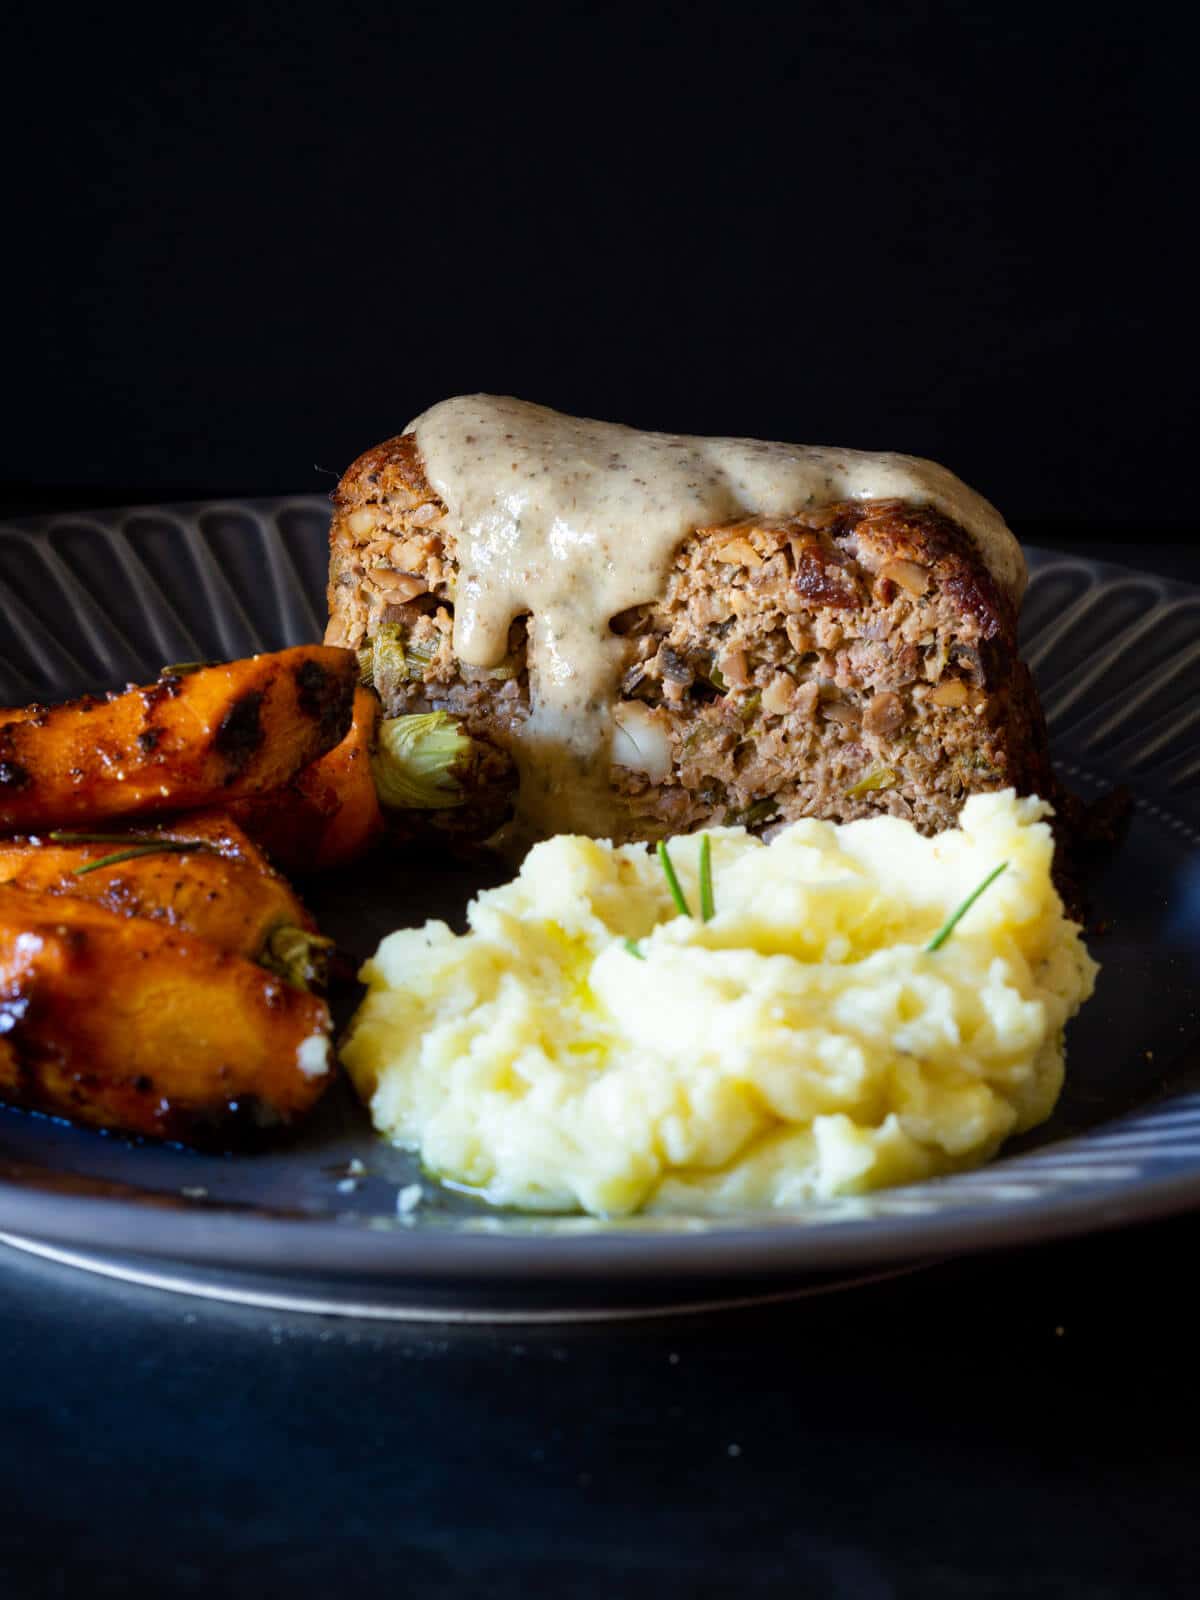 vegan mushroom gravy on top of a vegan nut roast served with mashed potatoes and maple glazed carrots.